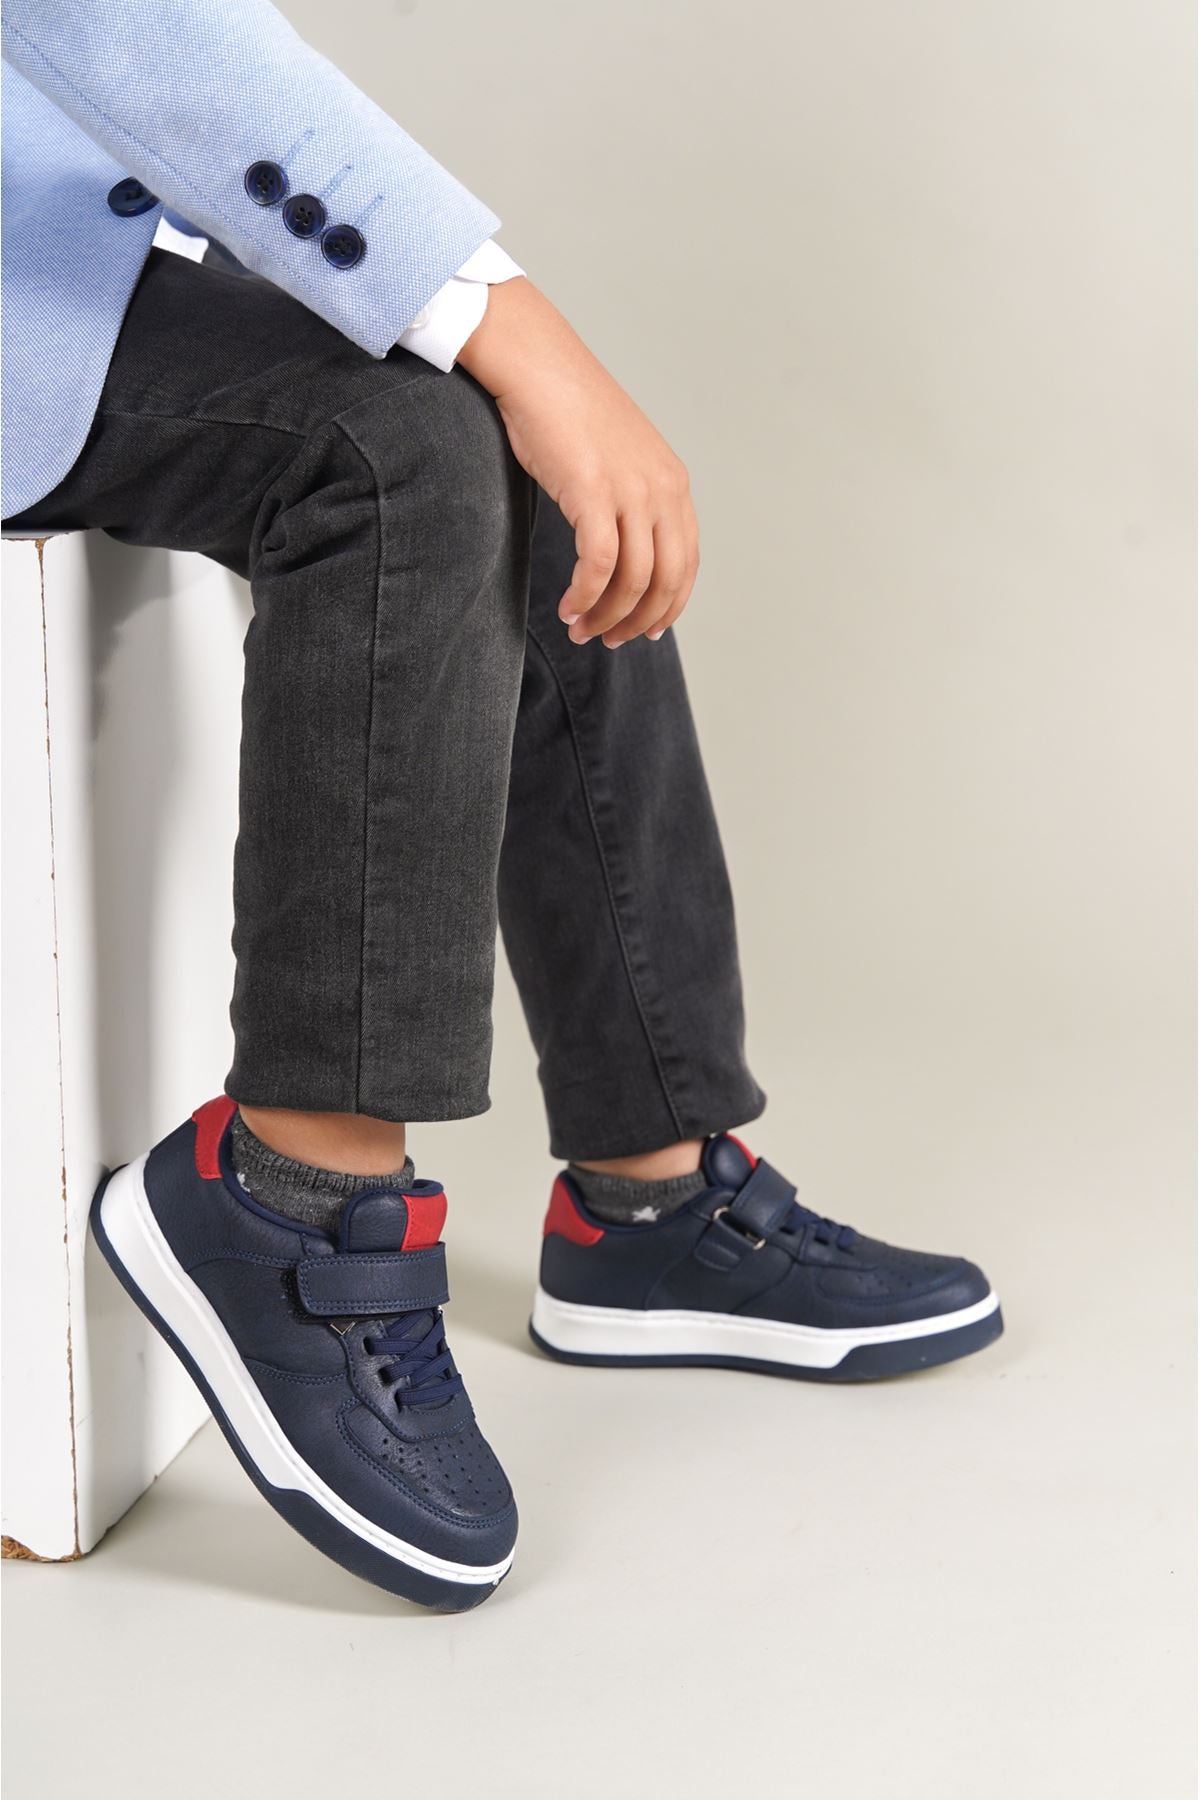 1009 Prime Kids Shoes Navy Blue Red